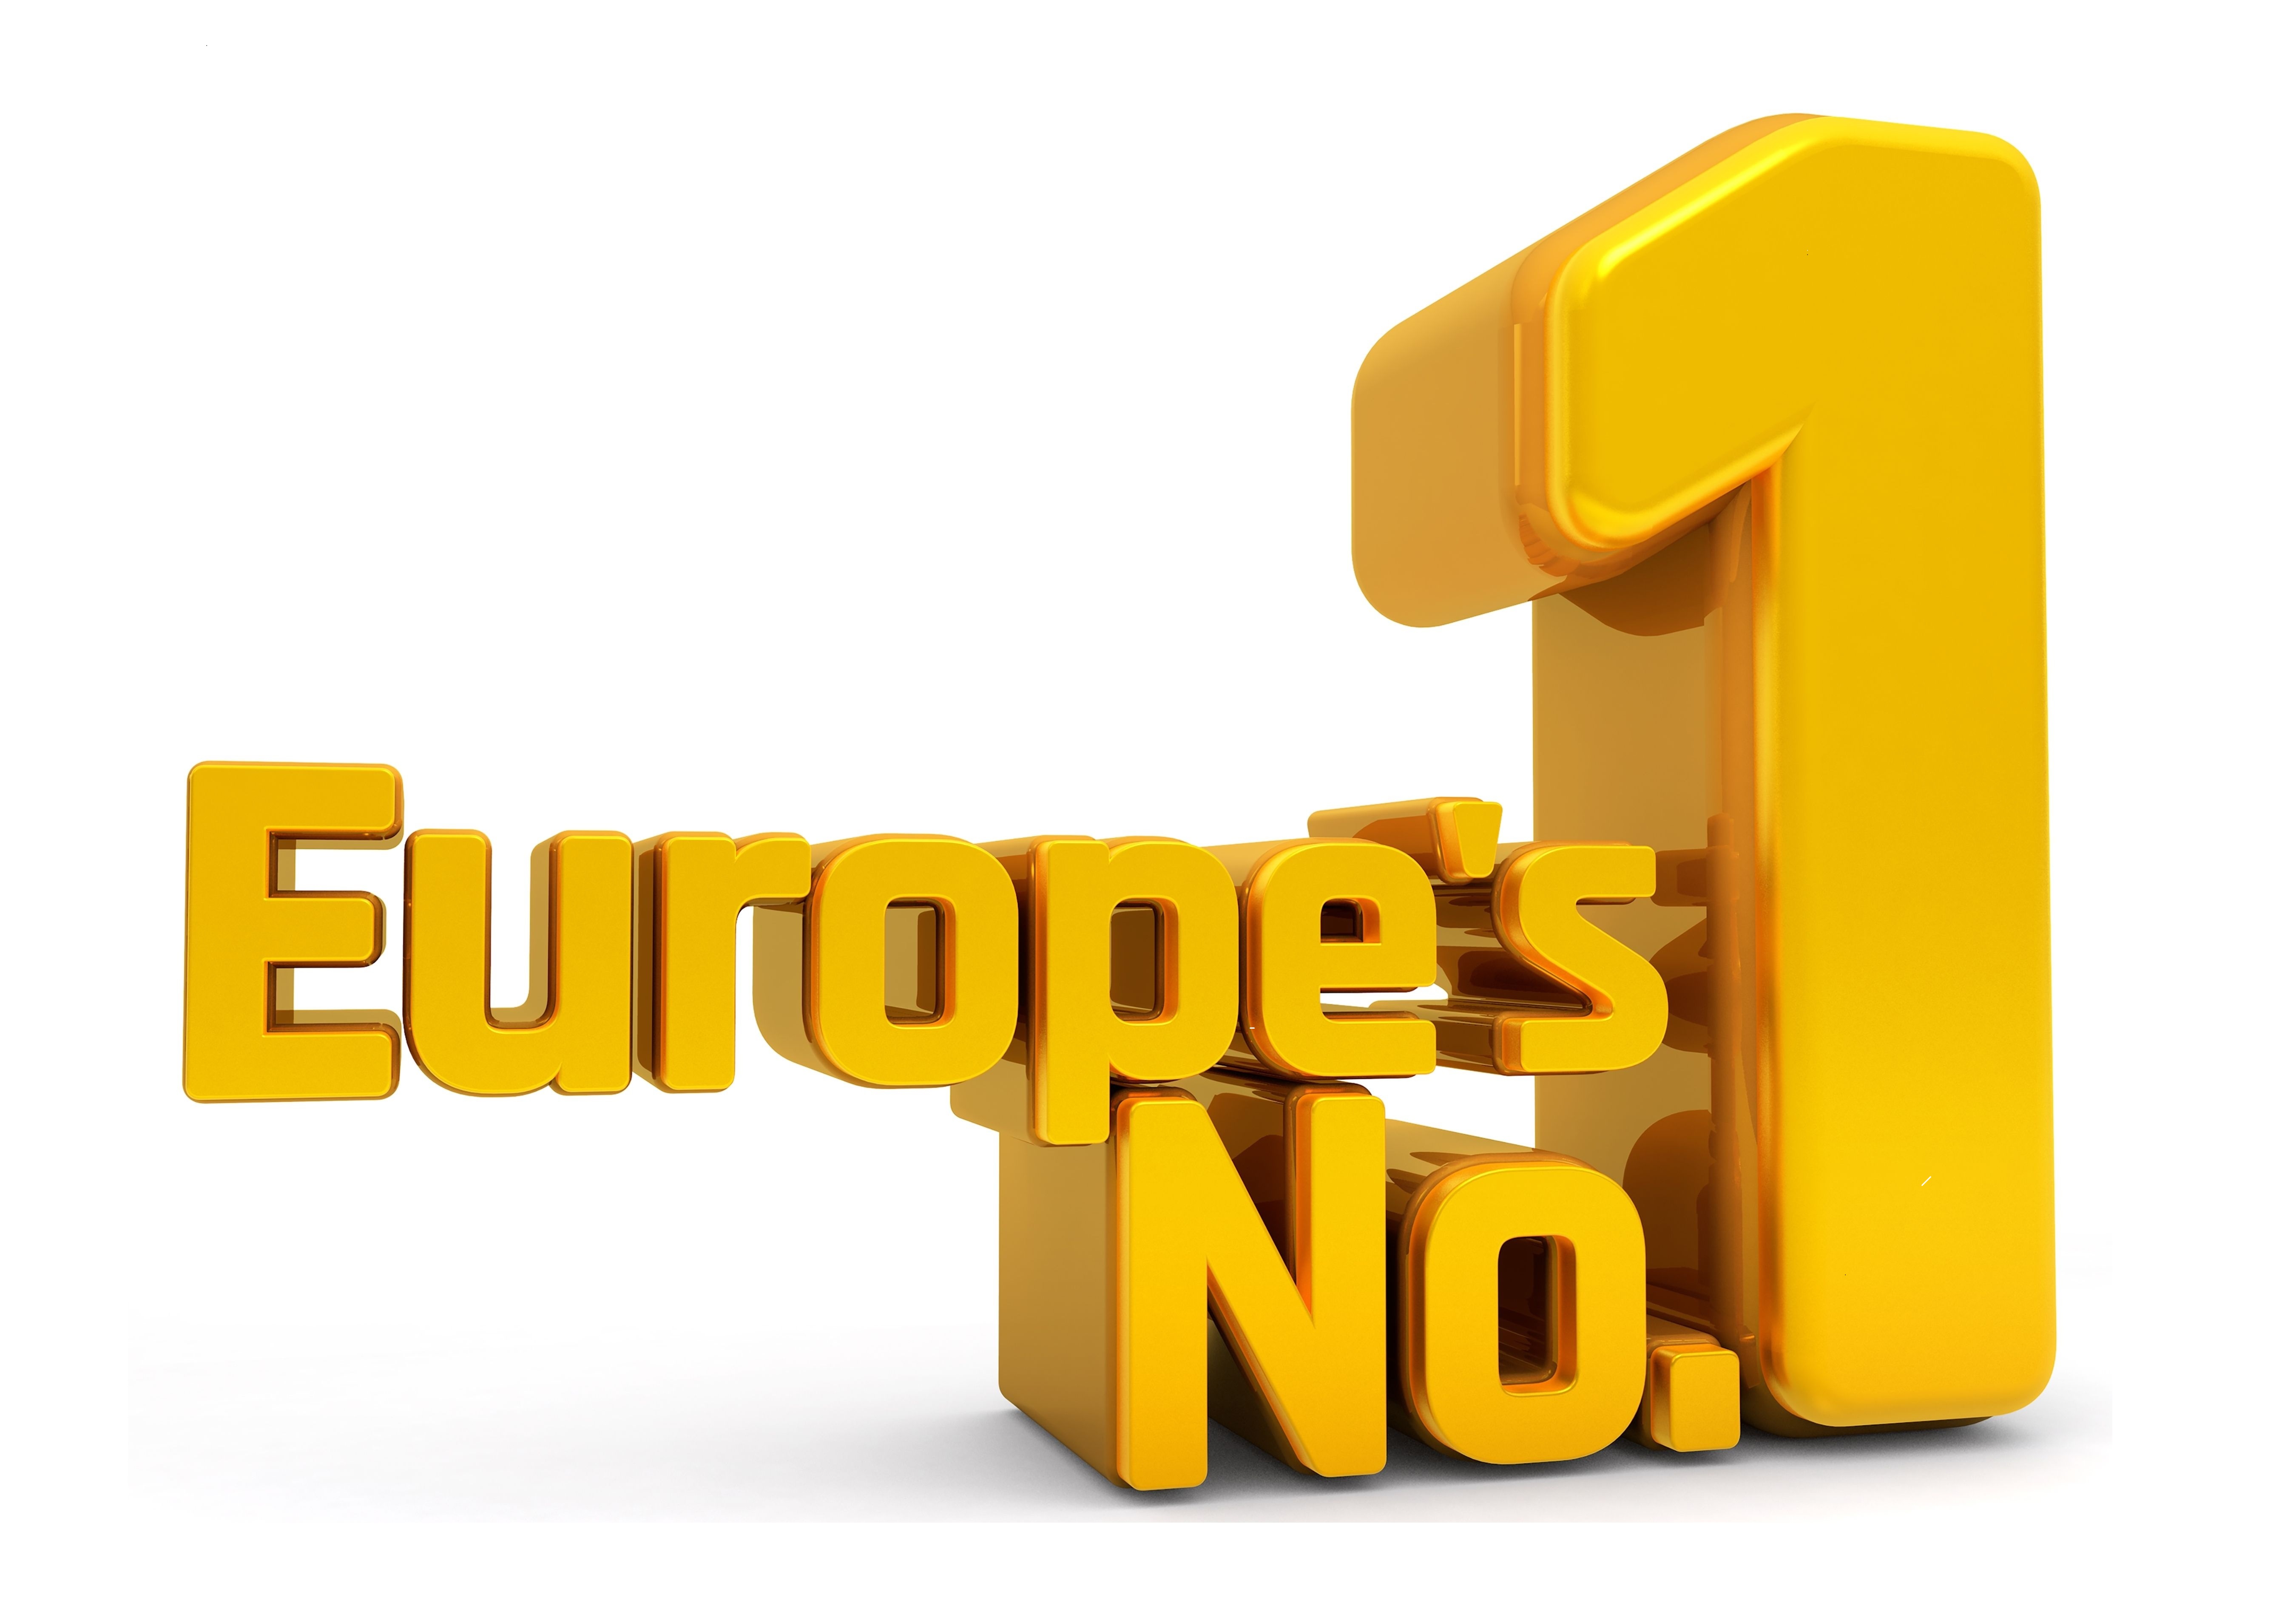 Europes Number One